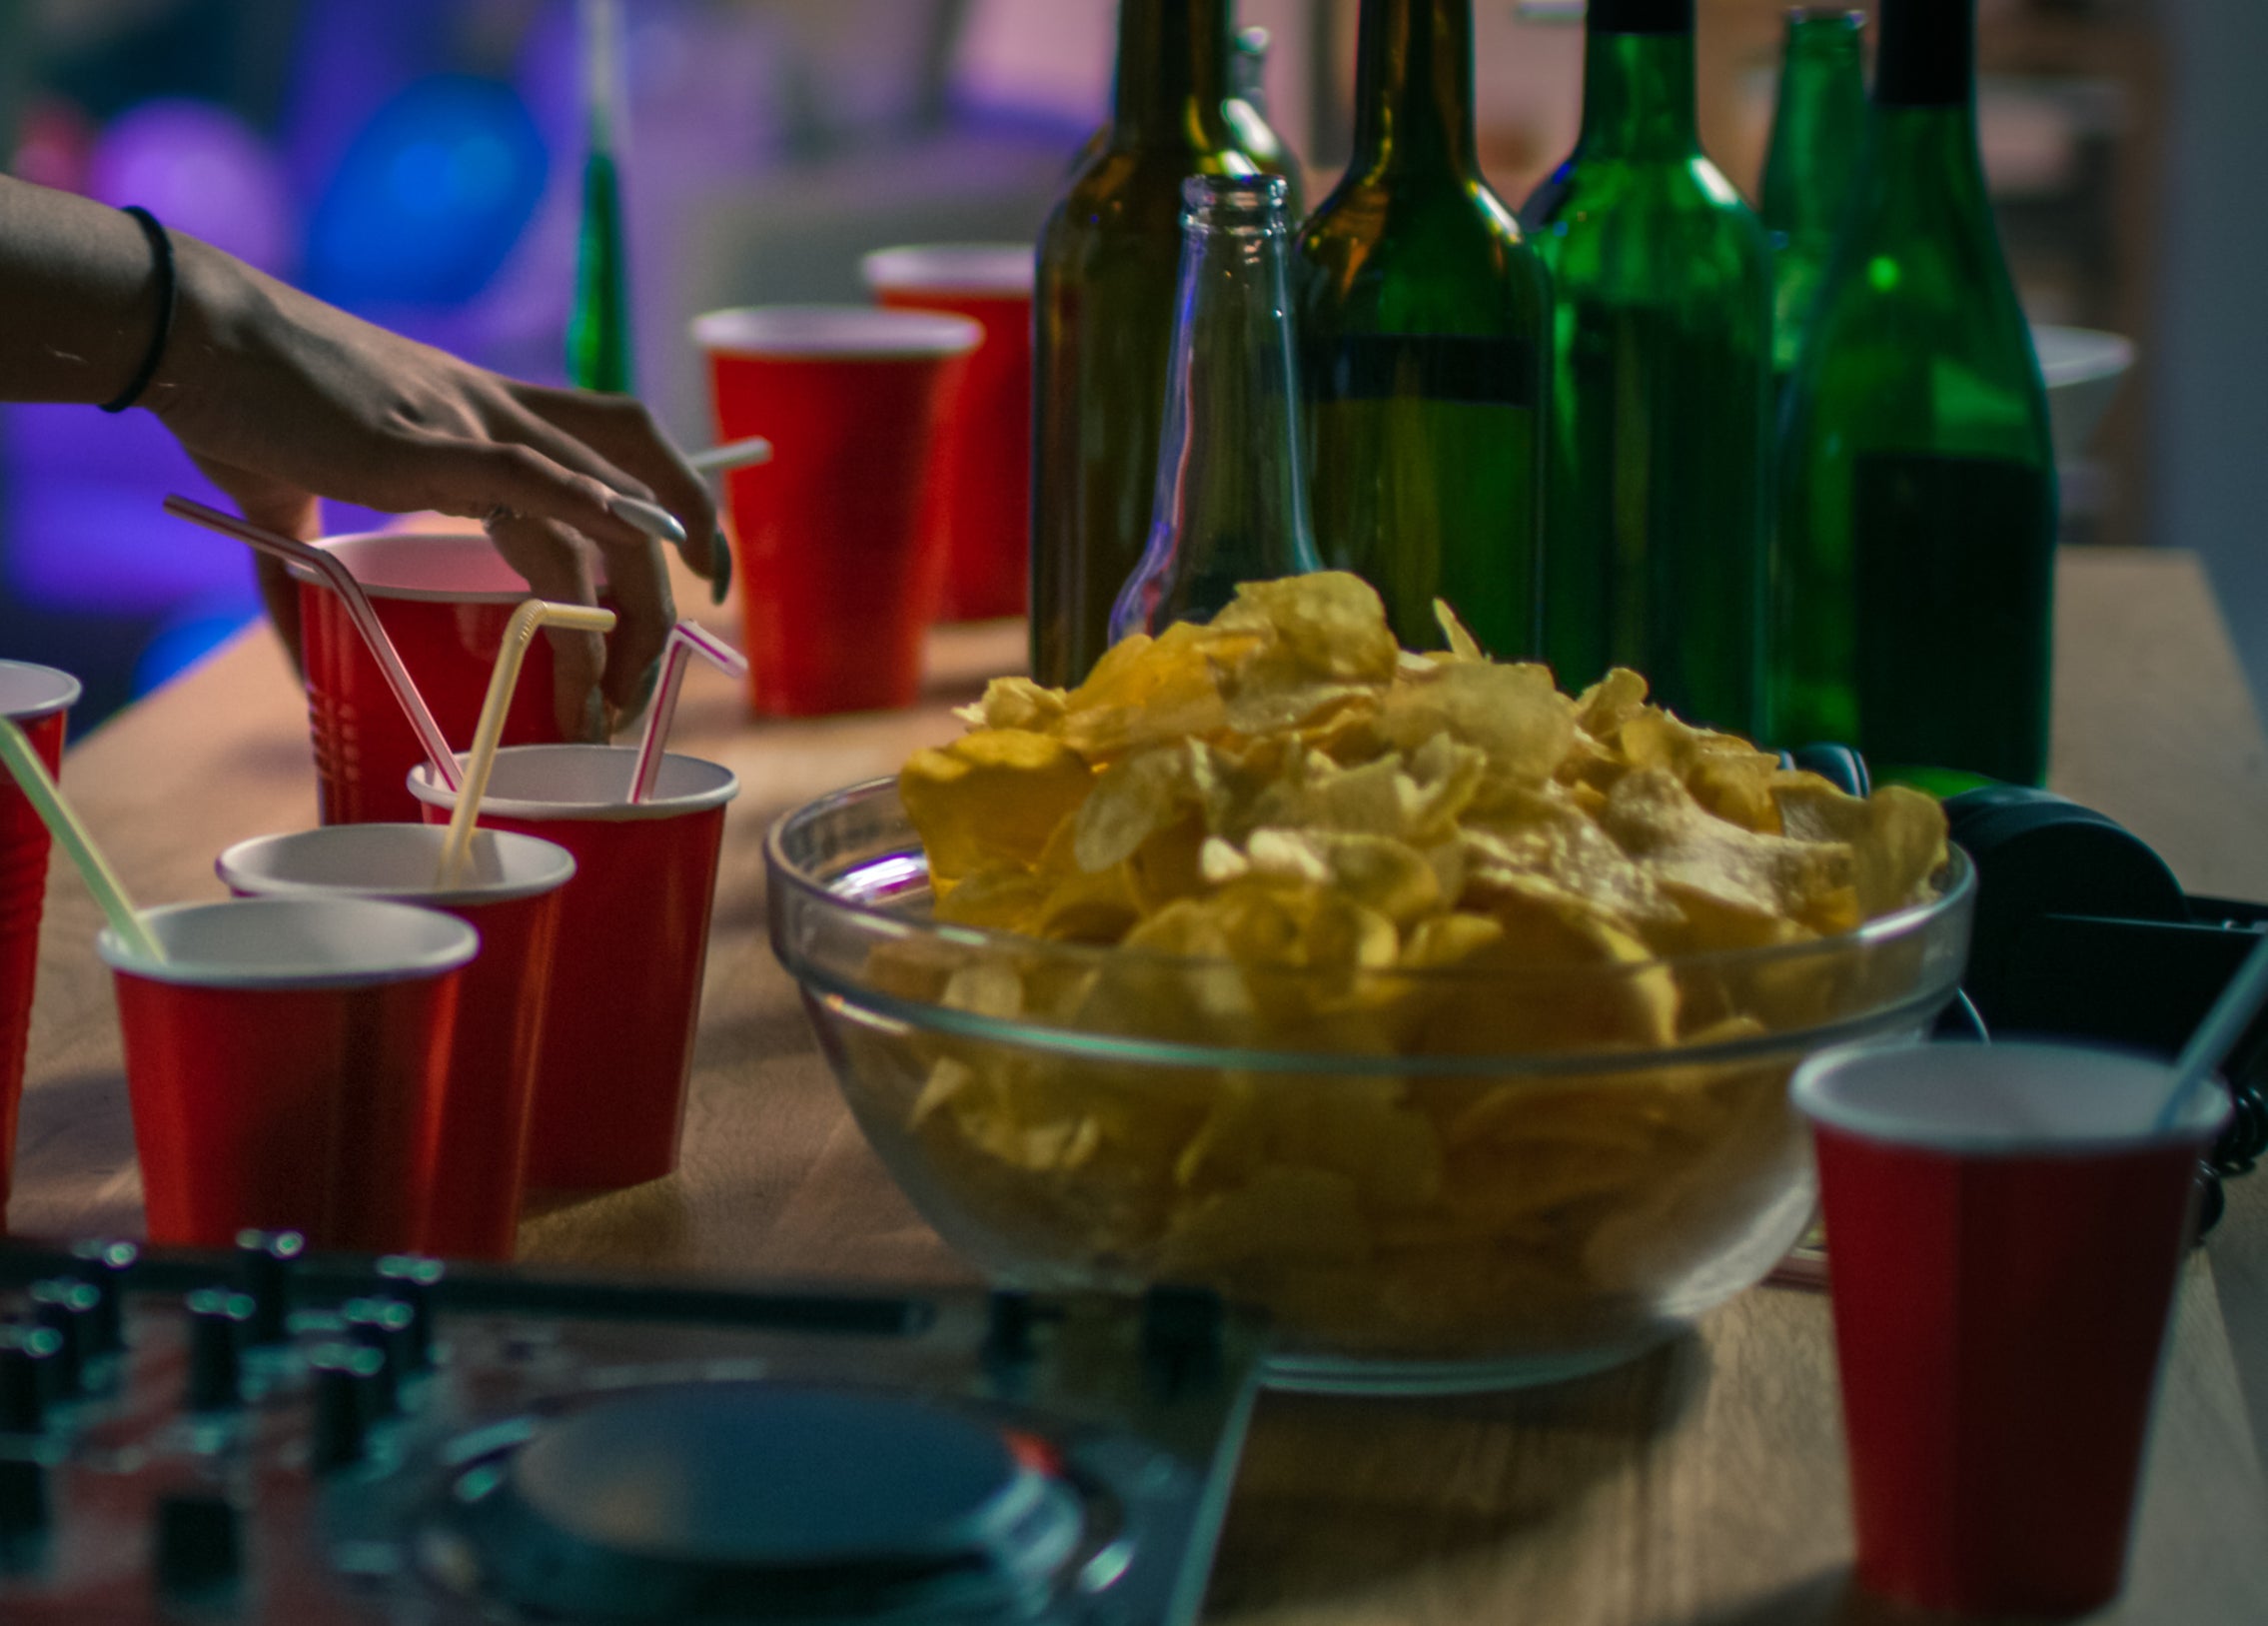 bottles, red solo cups, and chips at a college party